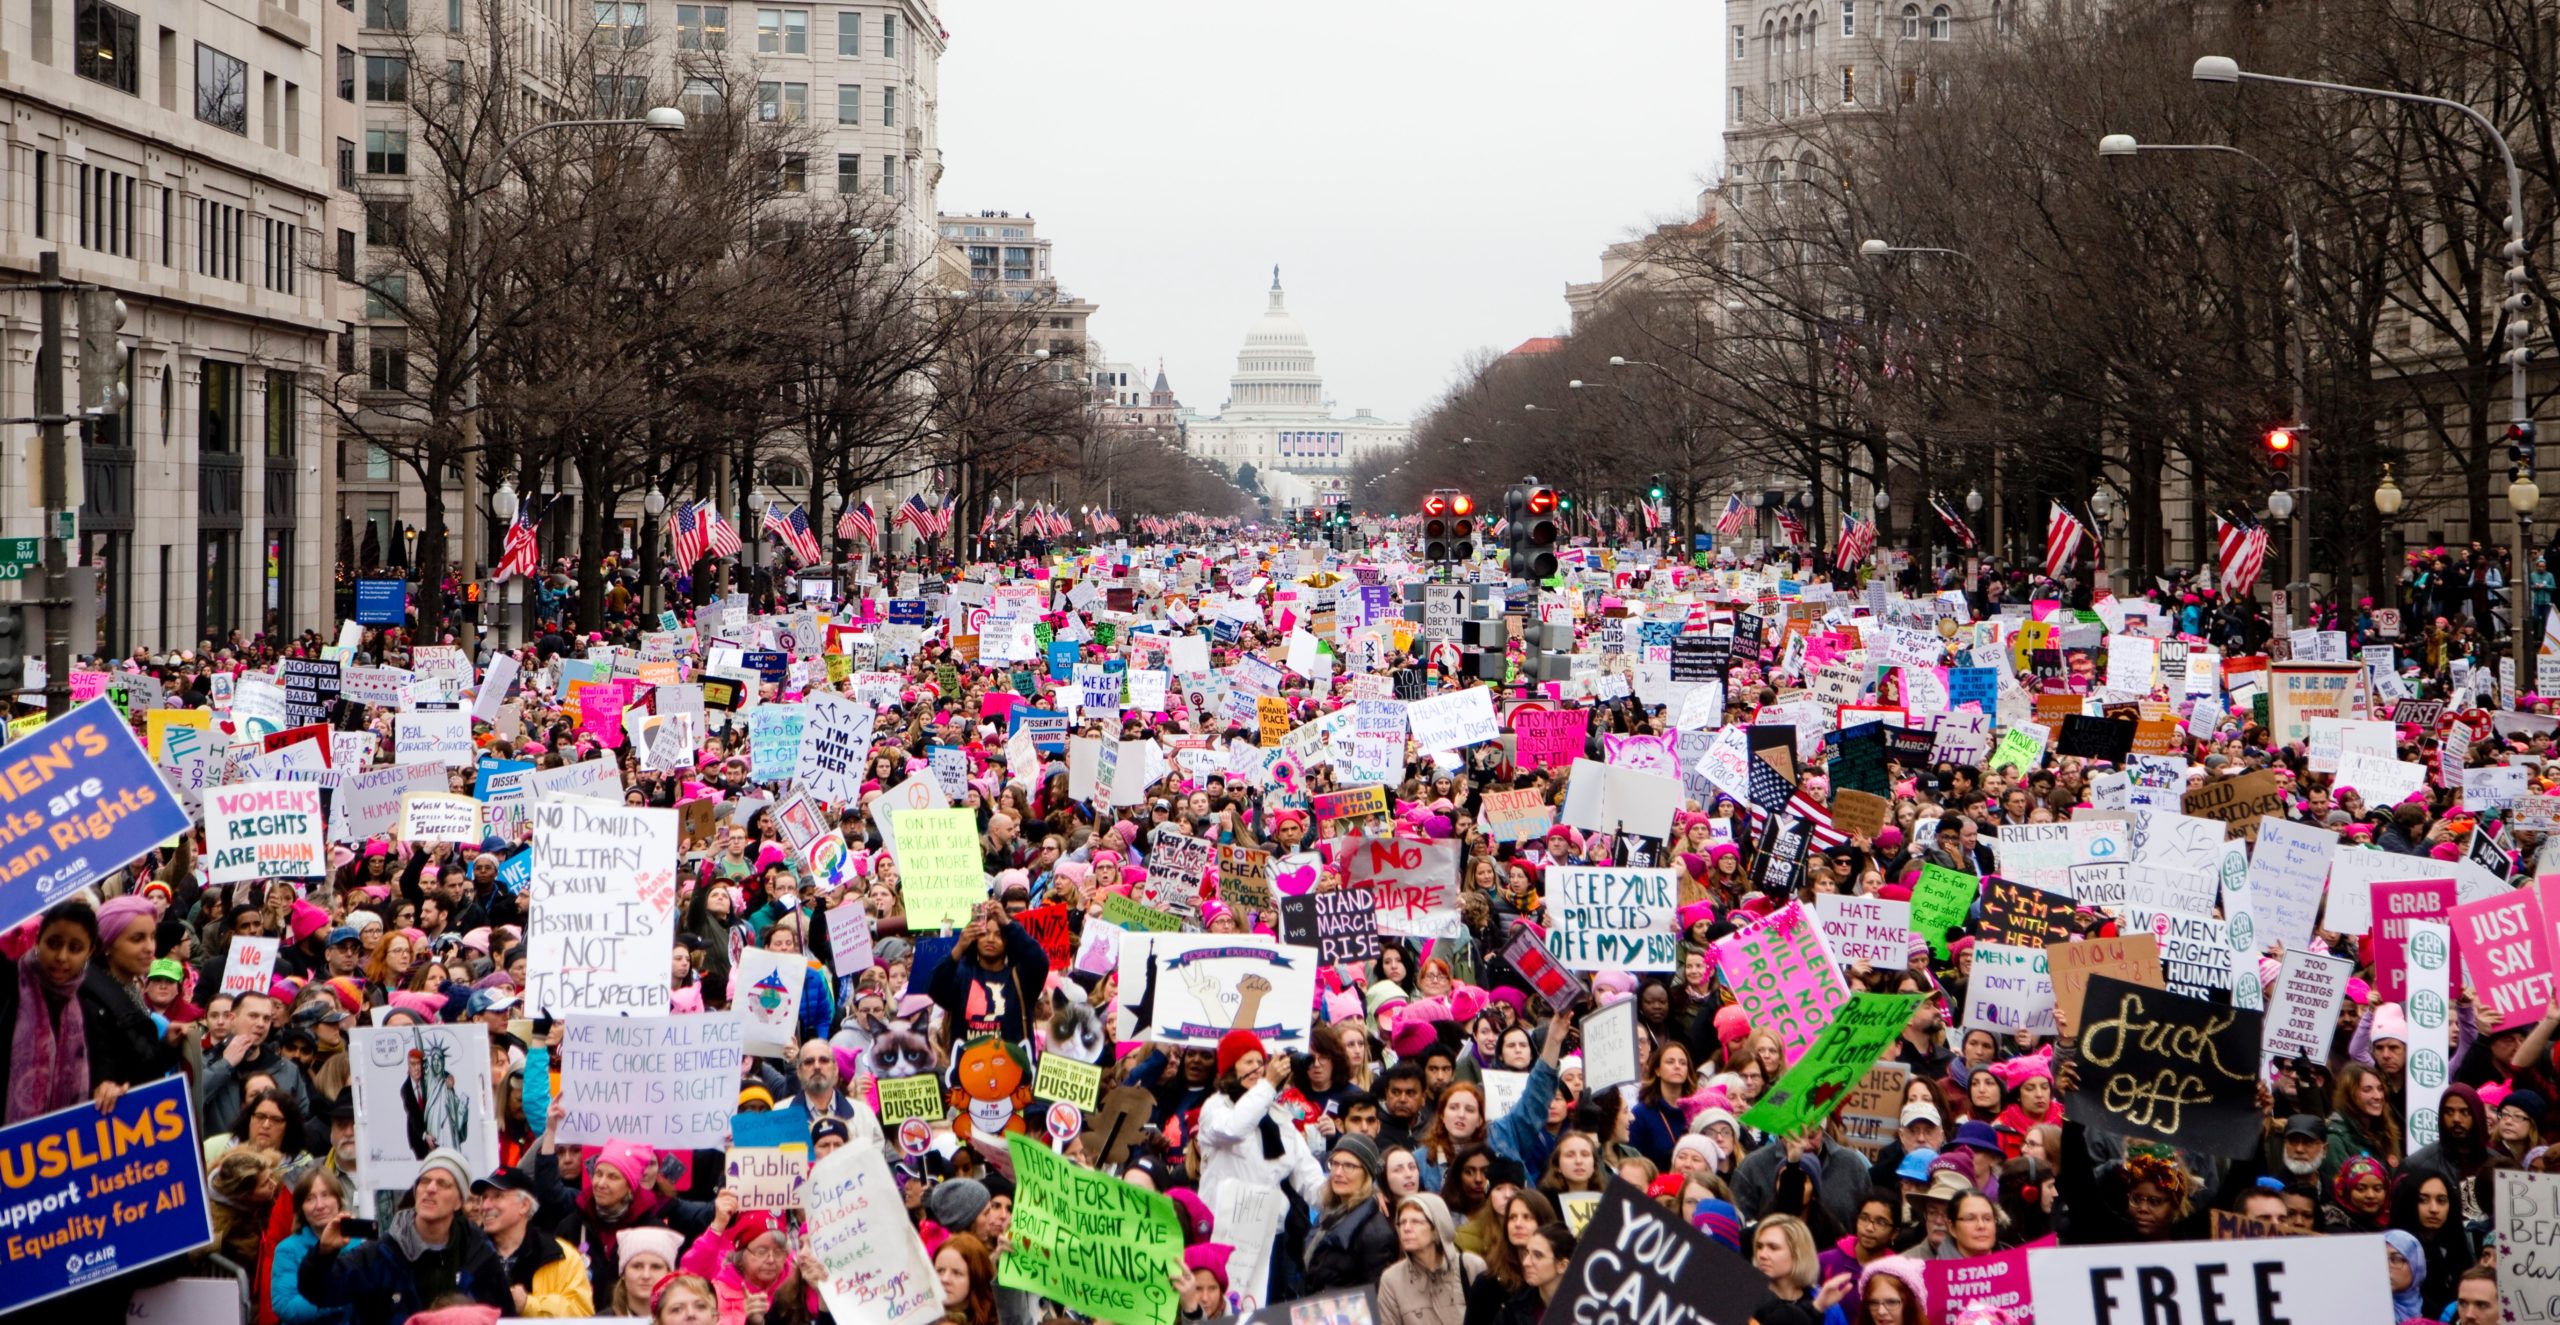 Image of protesters from the Women's March in Washington D.C. in 2017.